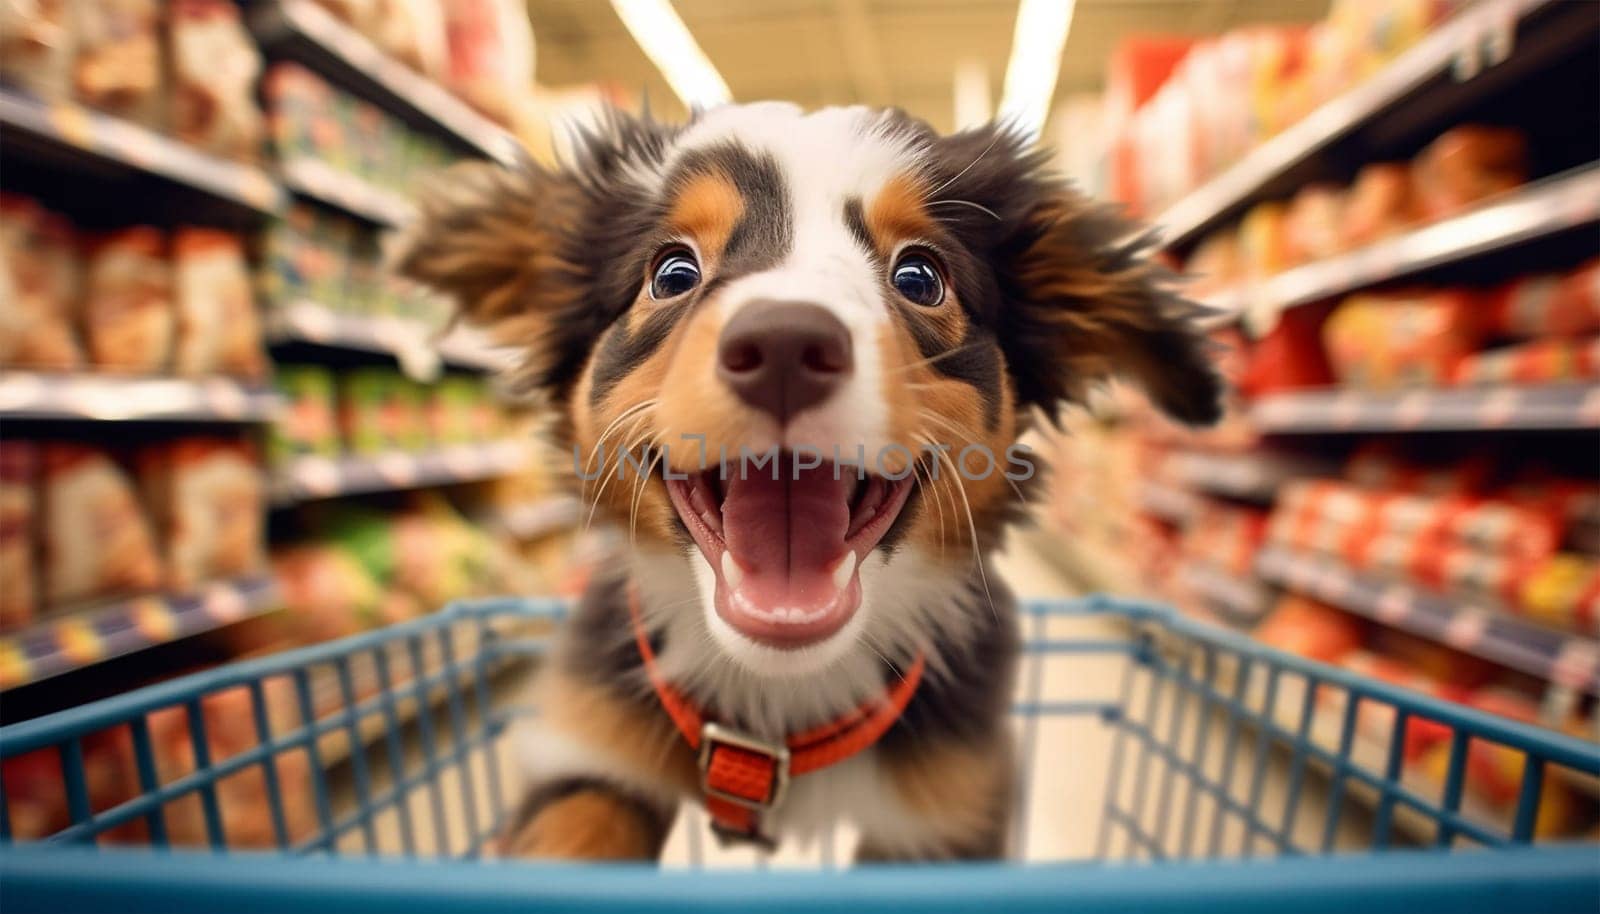 Cute funny dog in grocery store shopping in supermarket. puppy dog sitting in a shopping cart on blurred shop mall background. Concept for animal pets groceries,delivery,shopping background cute